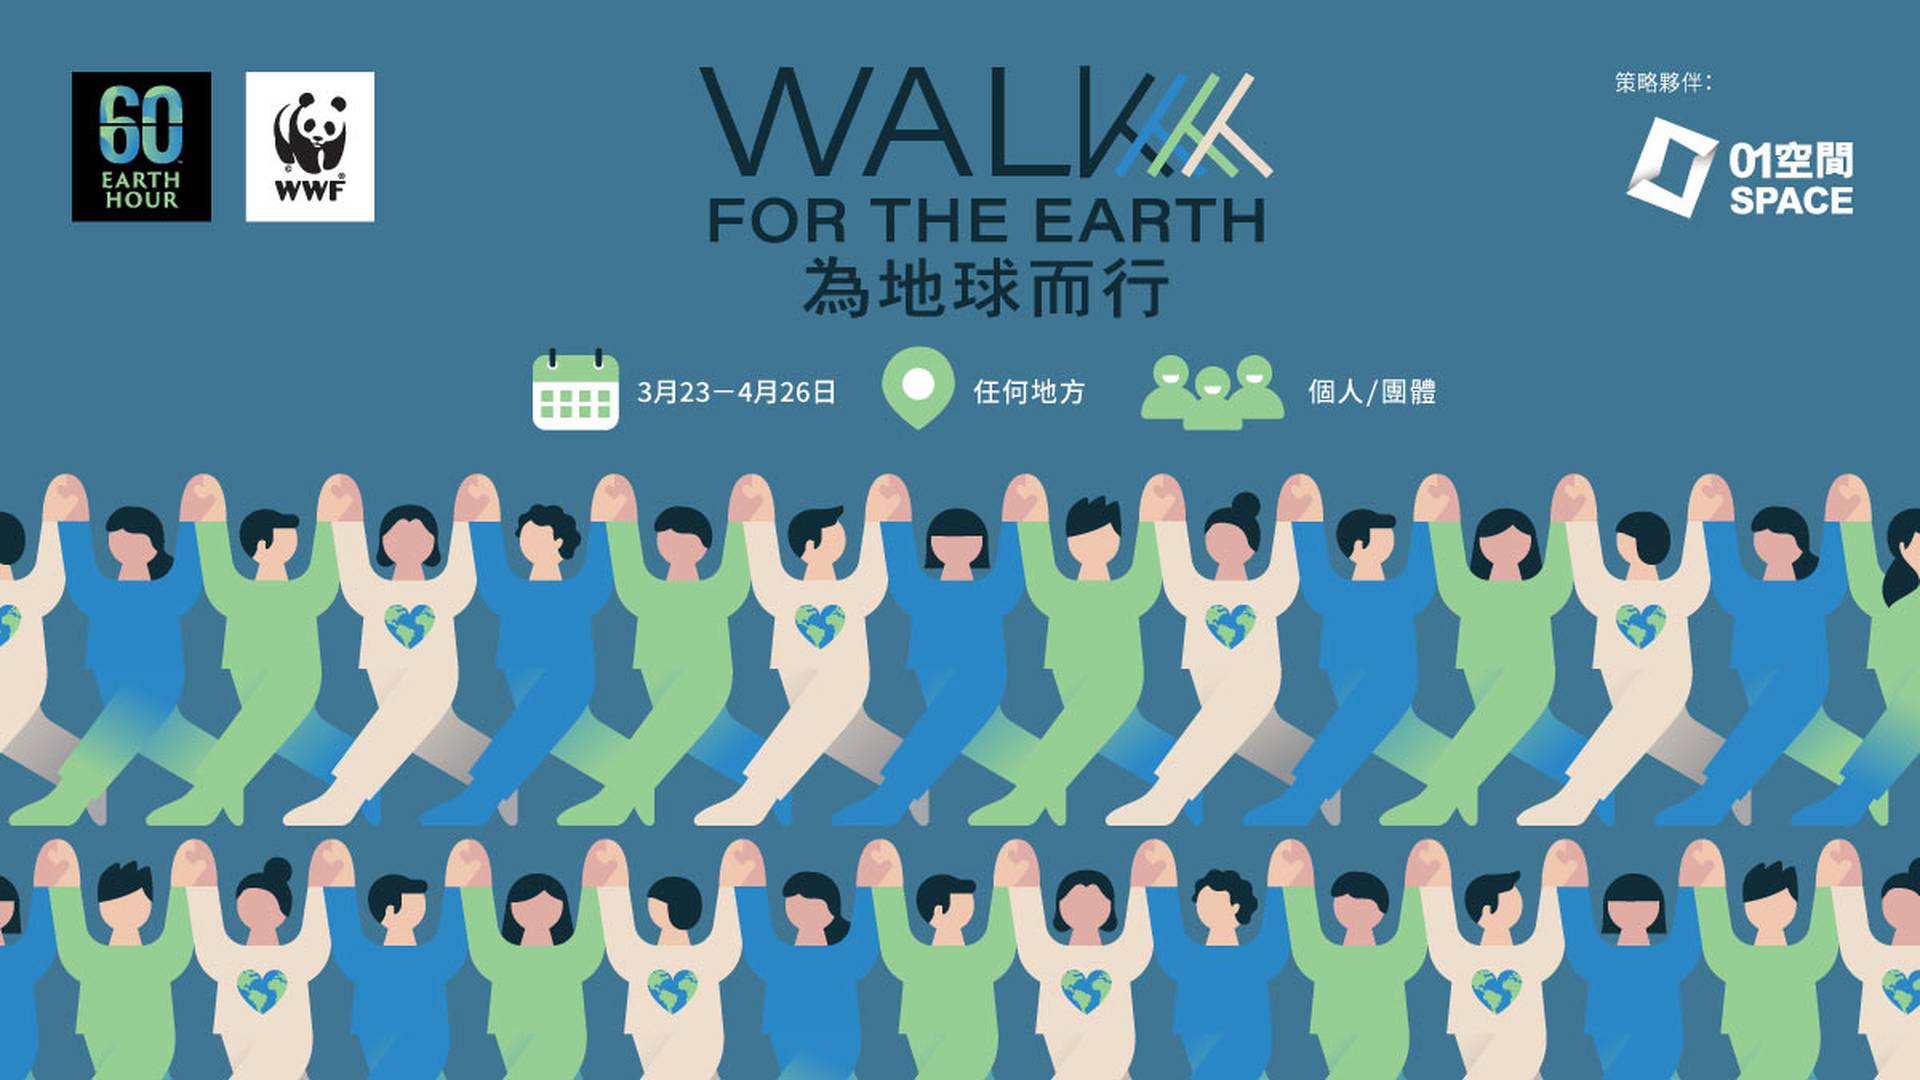 WWF - WALK FOR THE EARTH